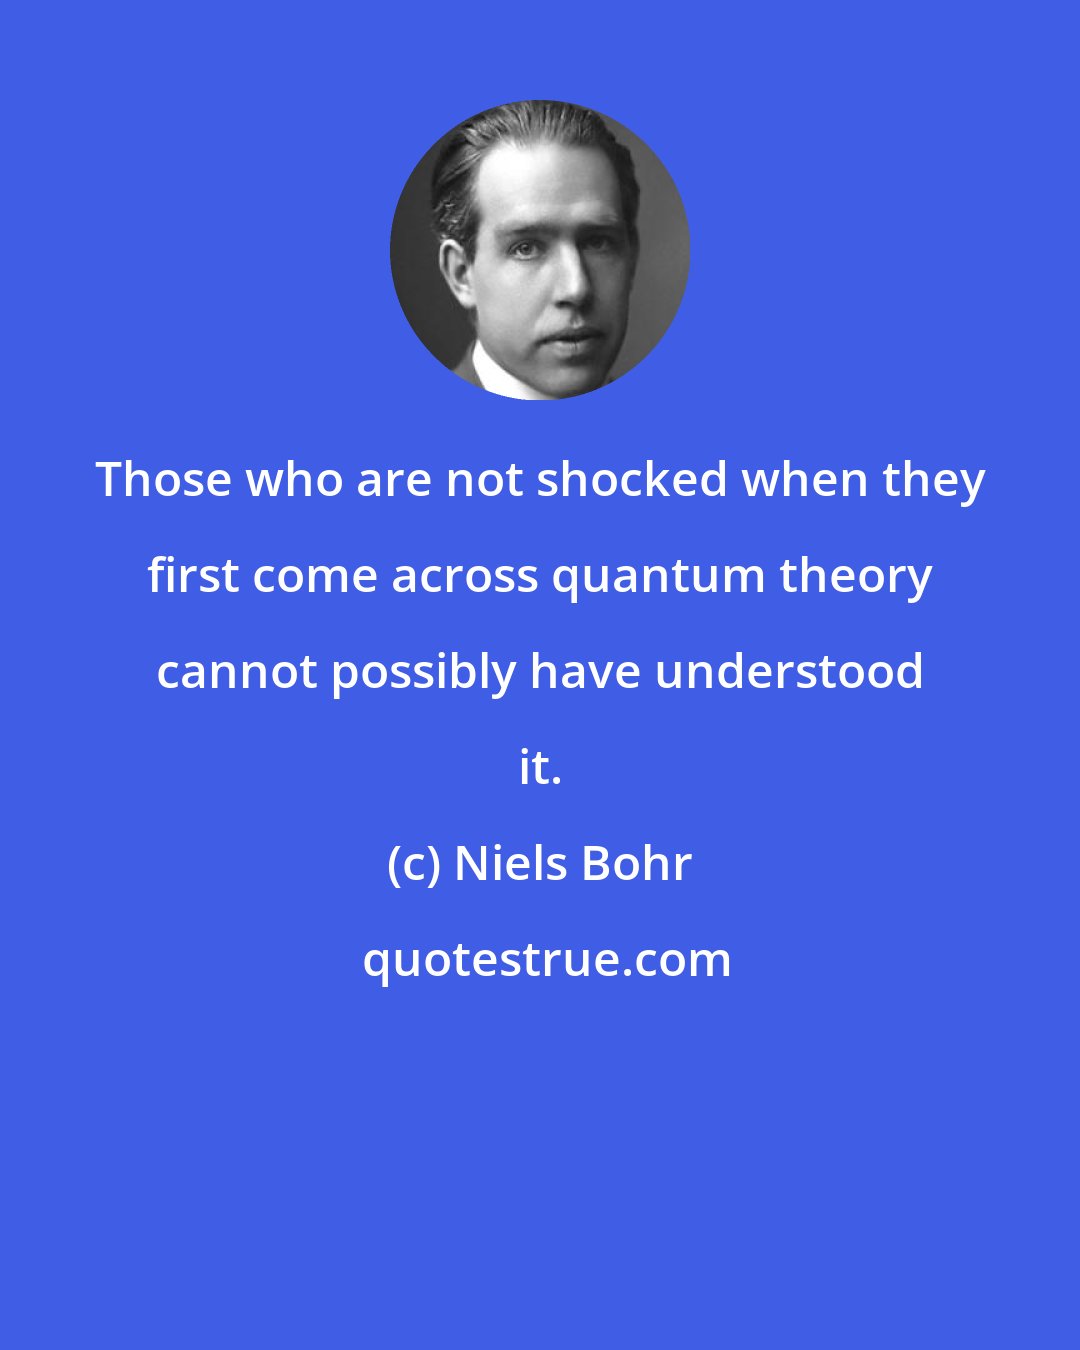 Niels Bohr: Those who are not shocked when they first come across quantum theory cannot possibly have understood it.